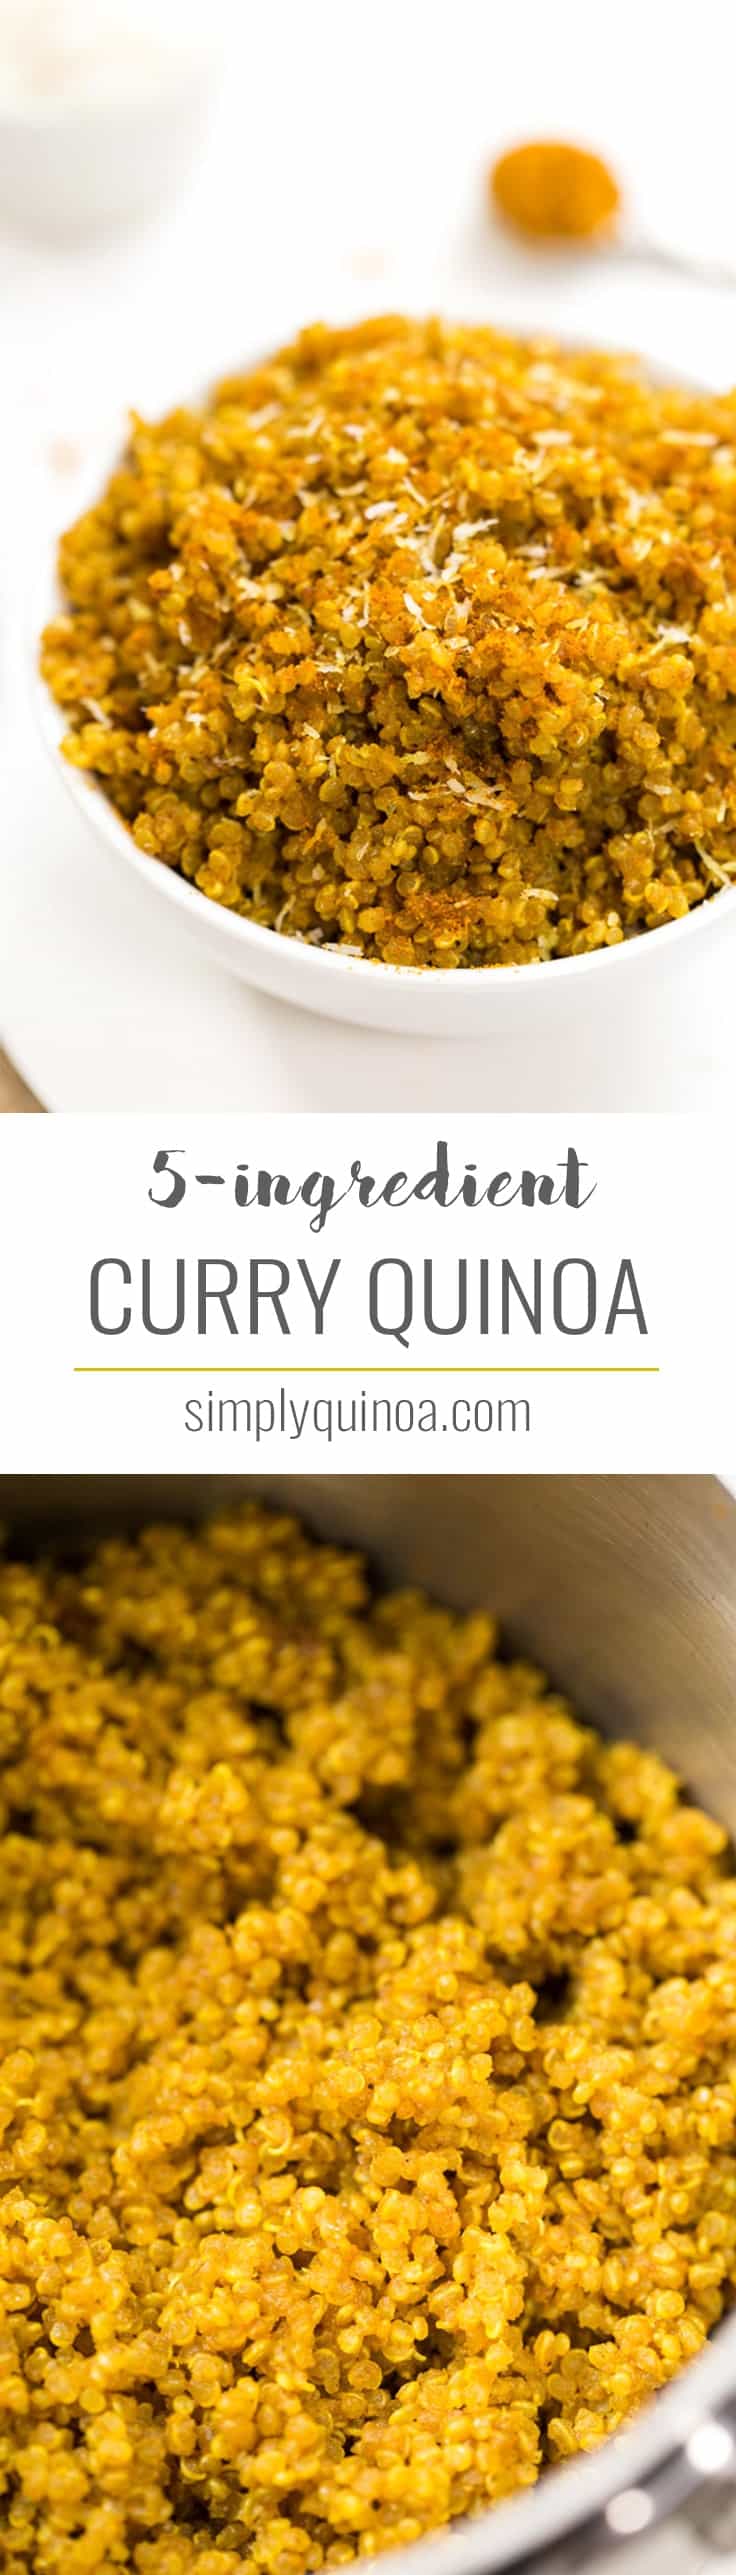 Serve this healthy 5-INGREDIENT Coconut Curry Quinoa with your next Indian meal! It's quick, easy, flavorful, uses just 5 ingredients and makes the perfect side dish!